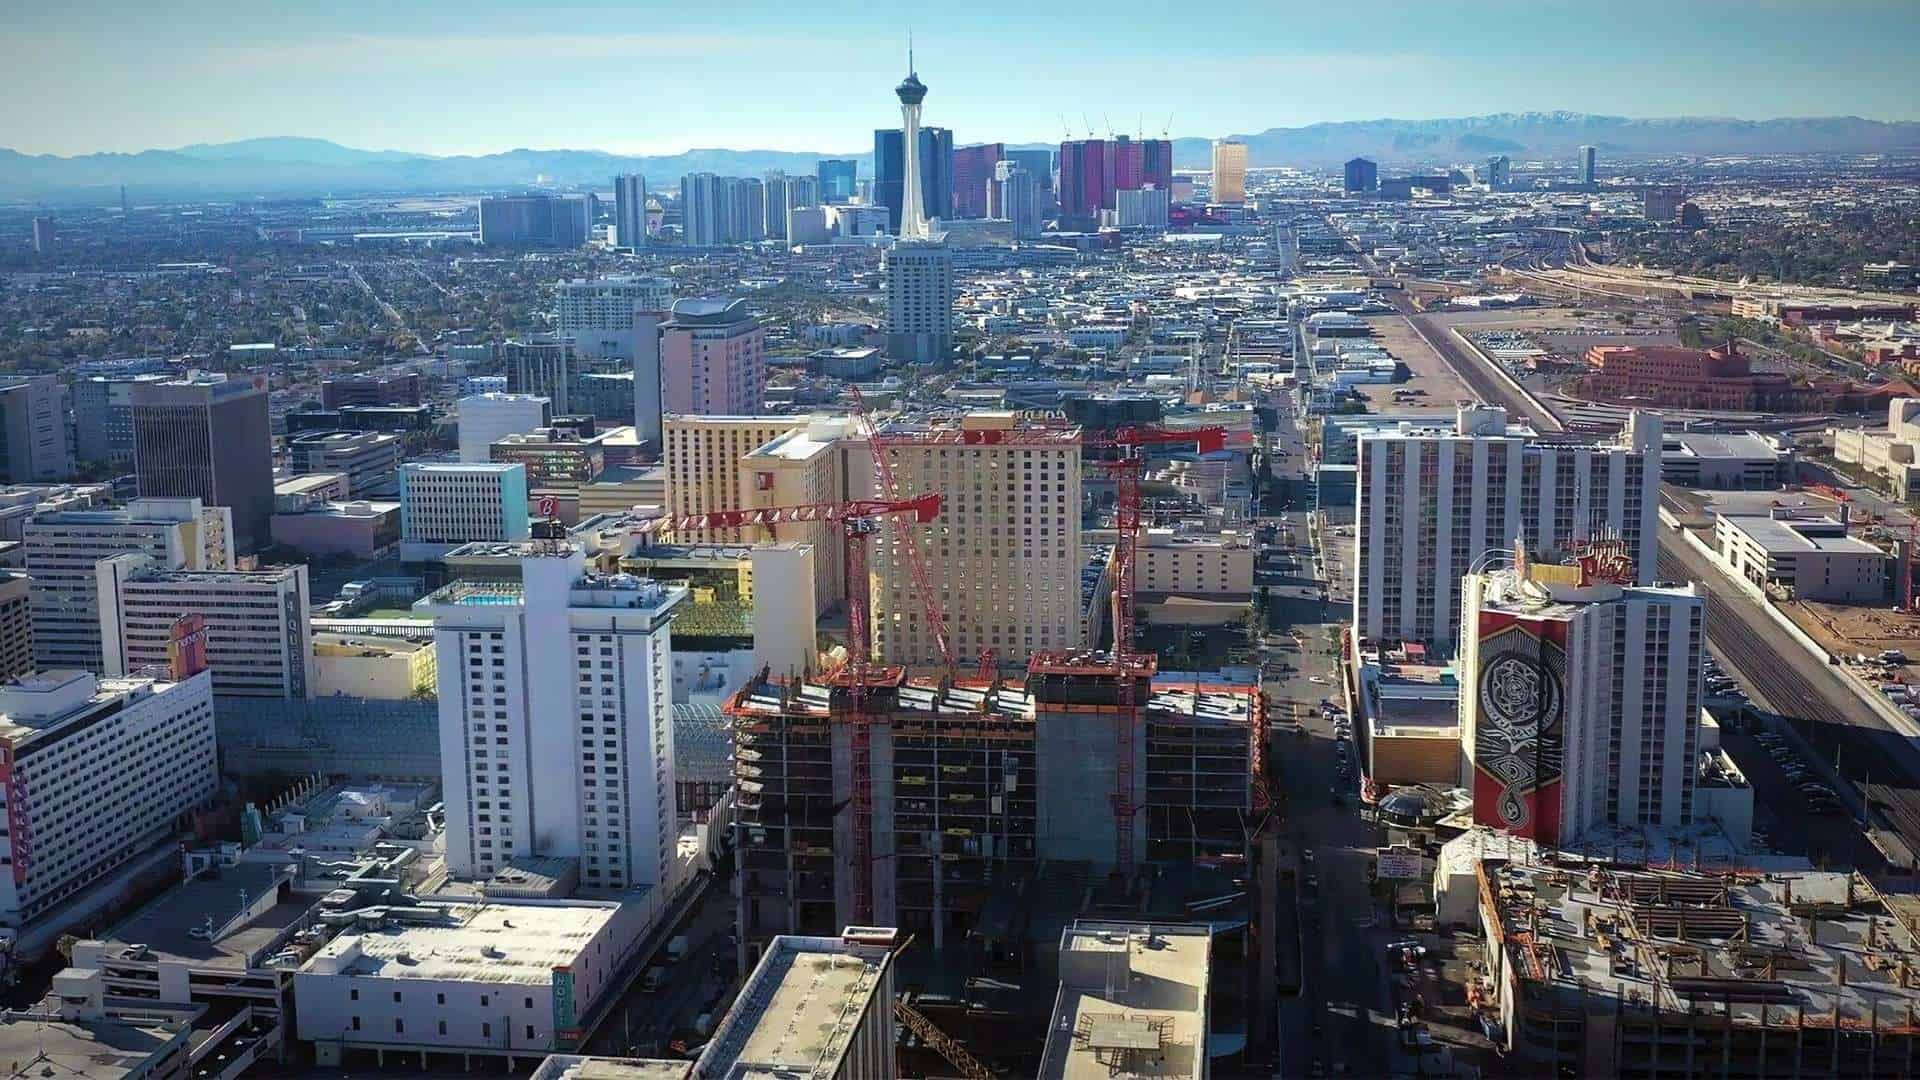 Circa Las Vegas to open casino floor in October, hotel to open by end of  year